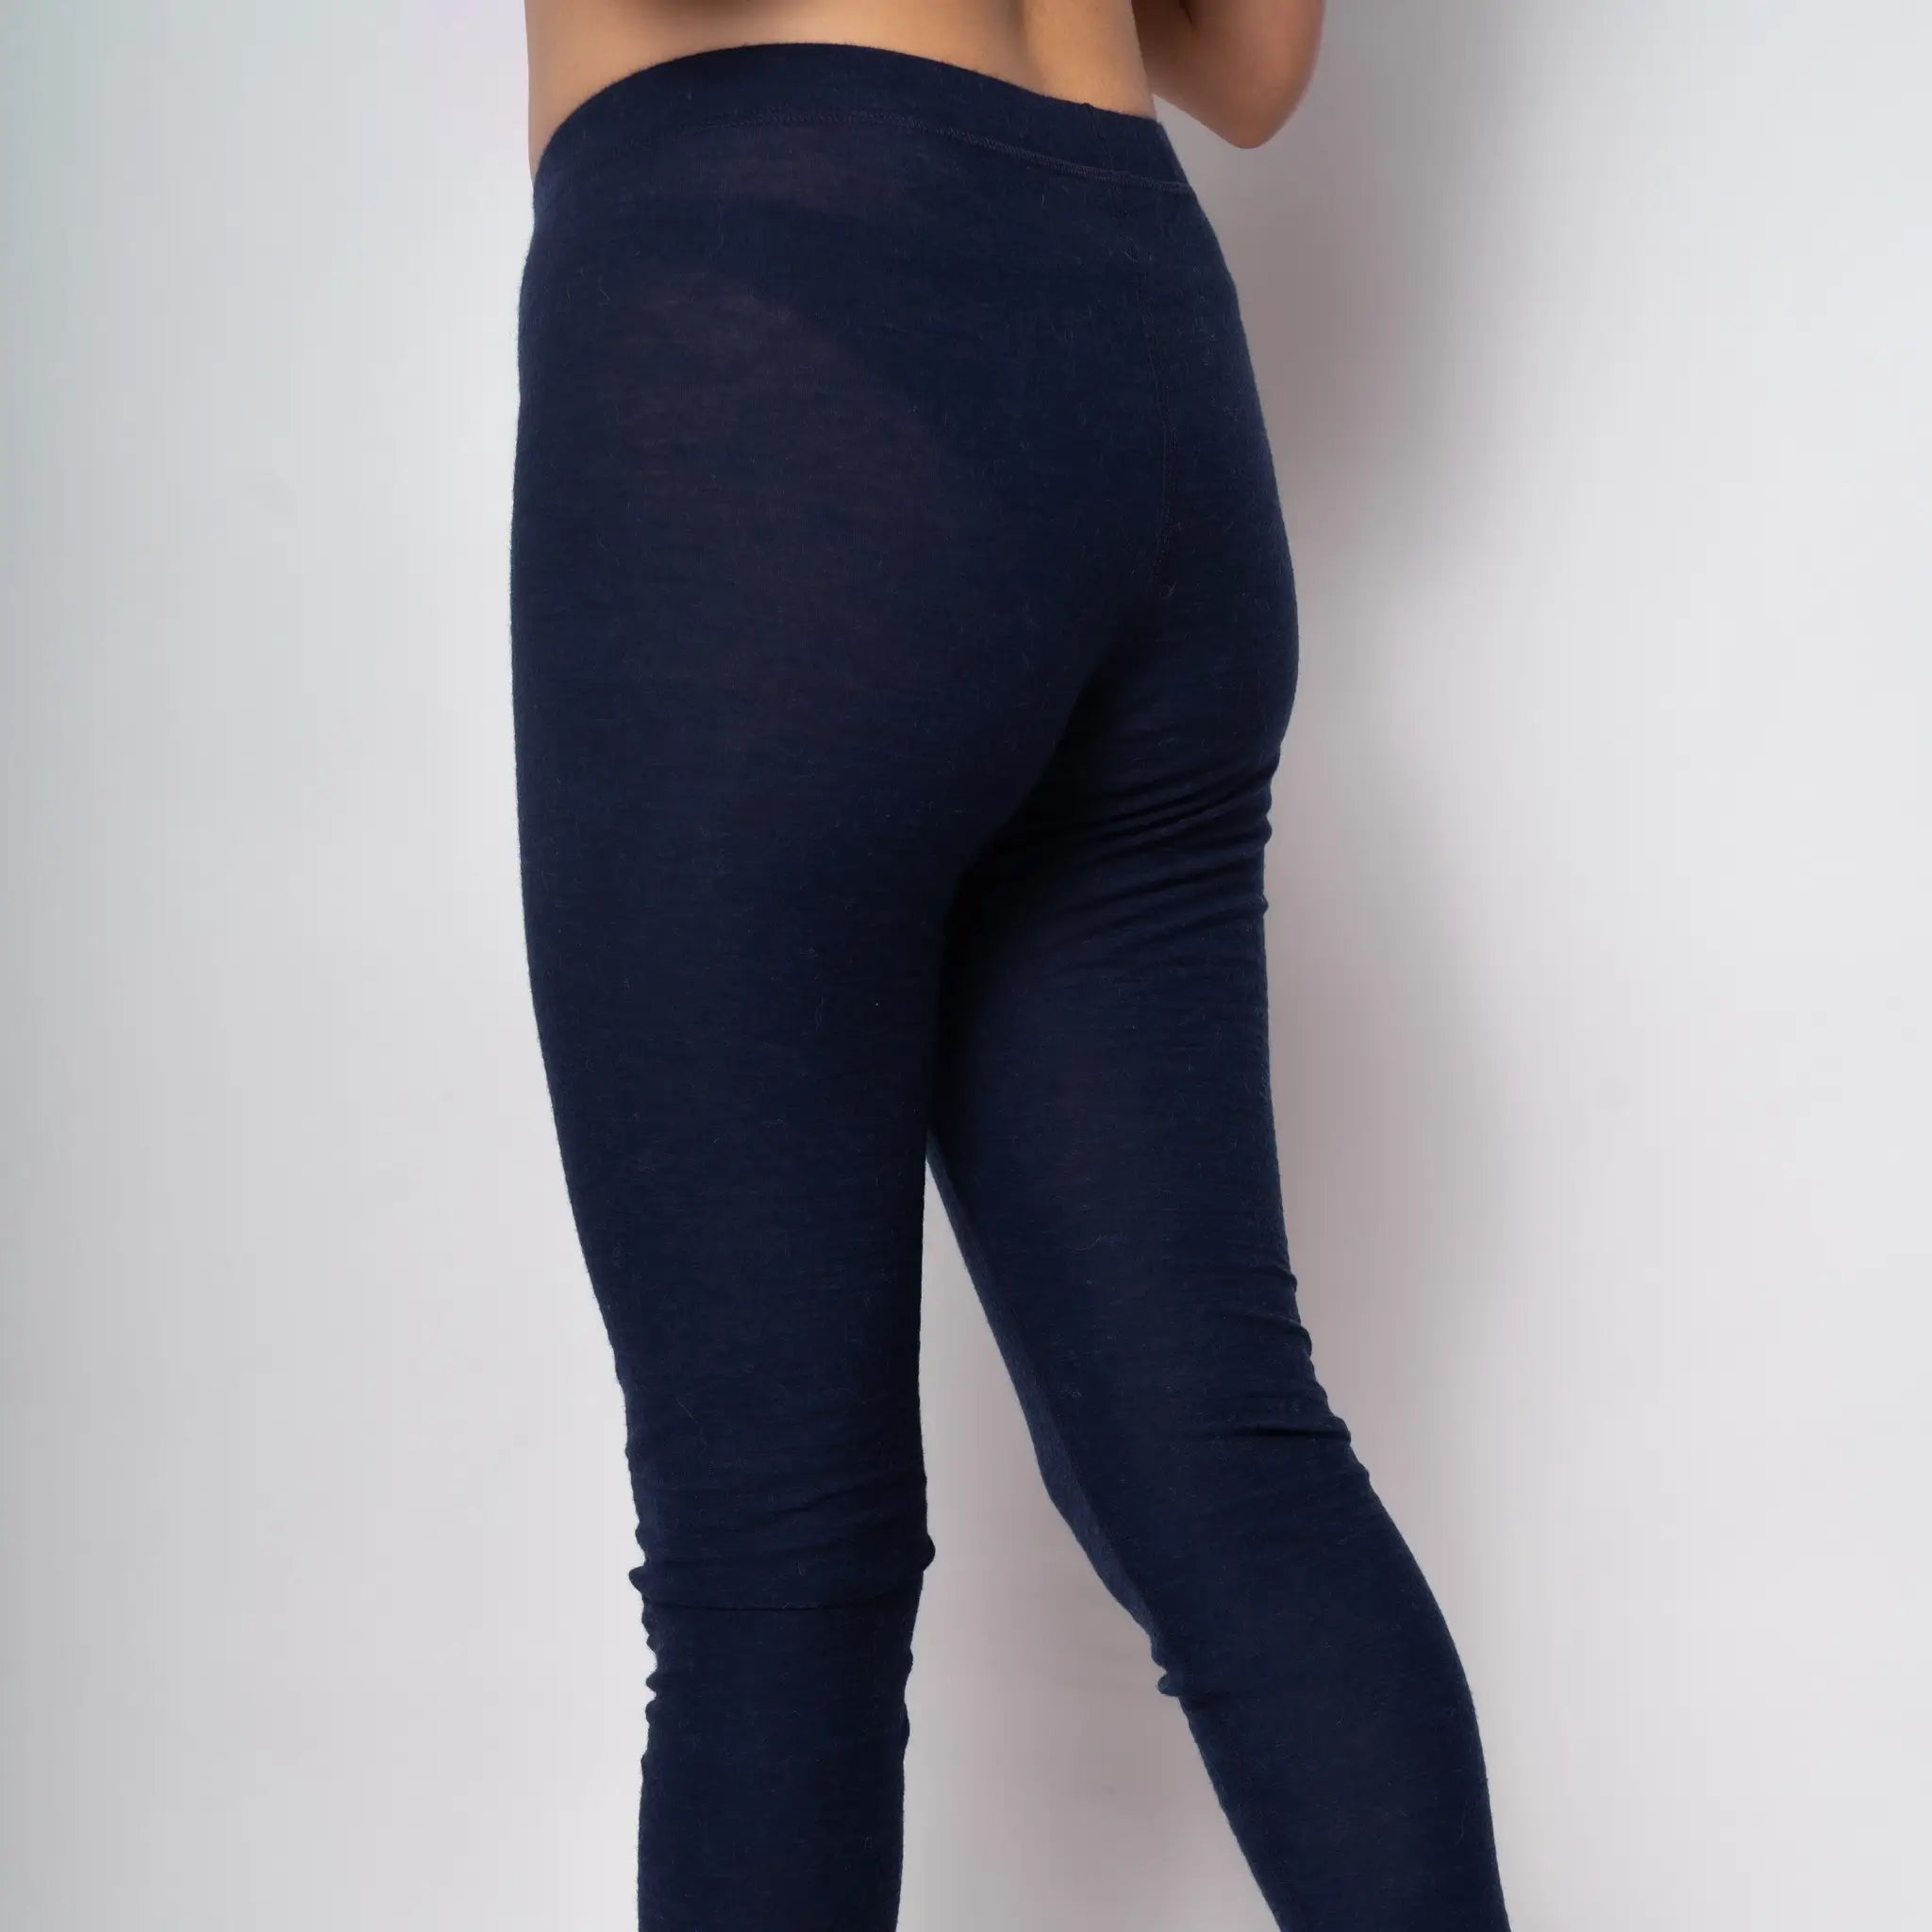 womens leggings ultralight 160 highly breathable color navy blue